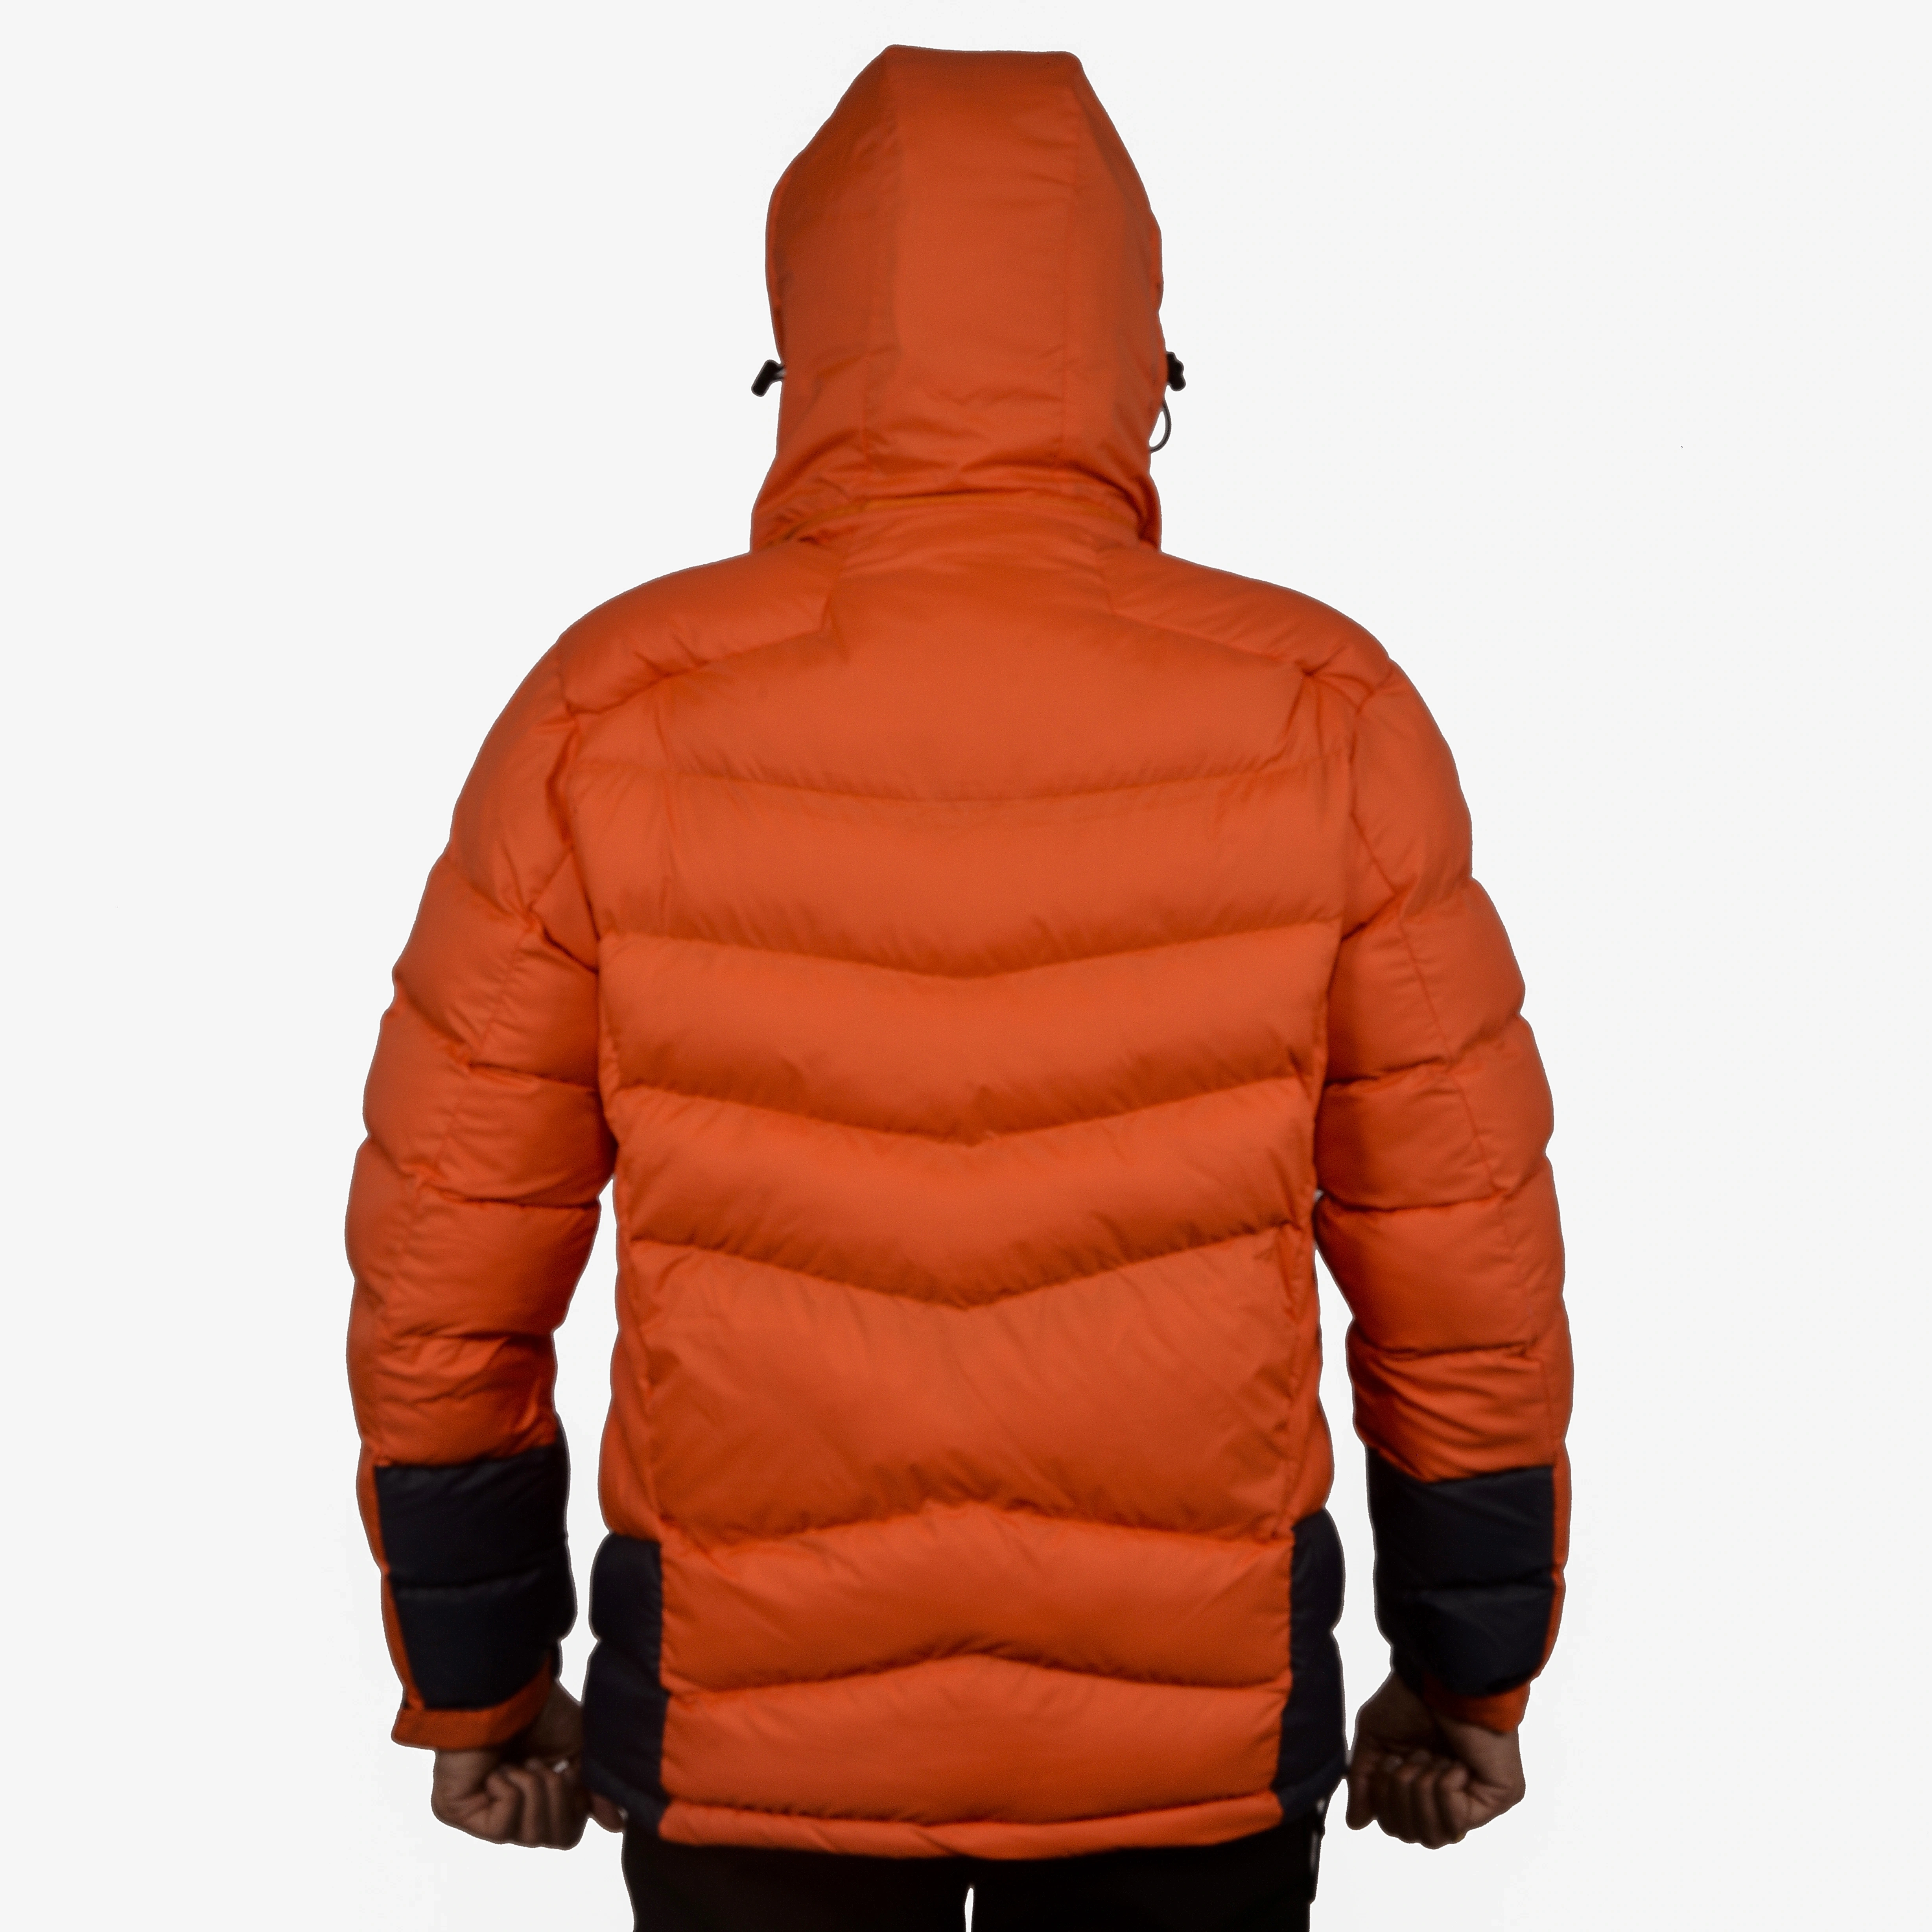 K2 Survivor Down Jacket for Men: Stylized Functionality for Extreme Cold Weather Expeditions (Up to -20°C)-M-Orange-3